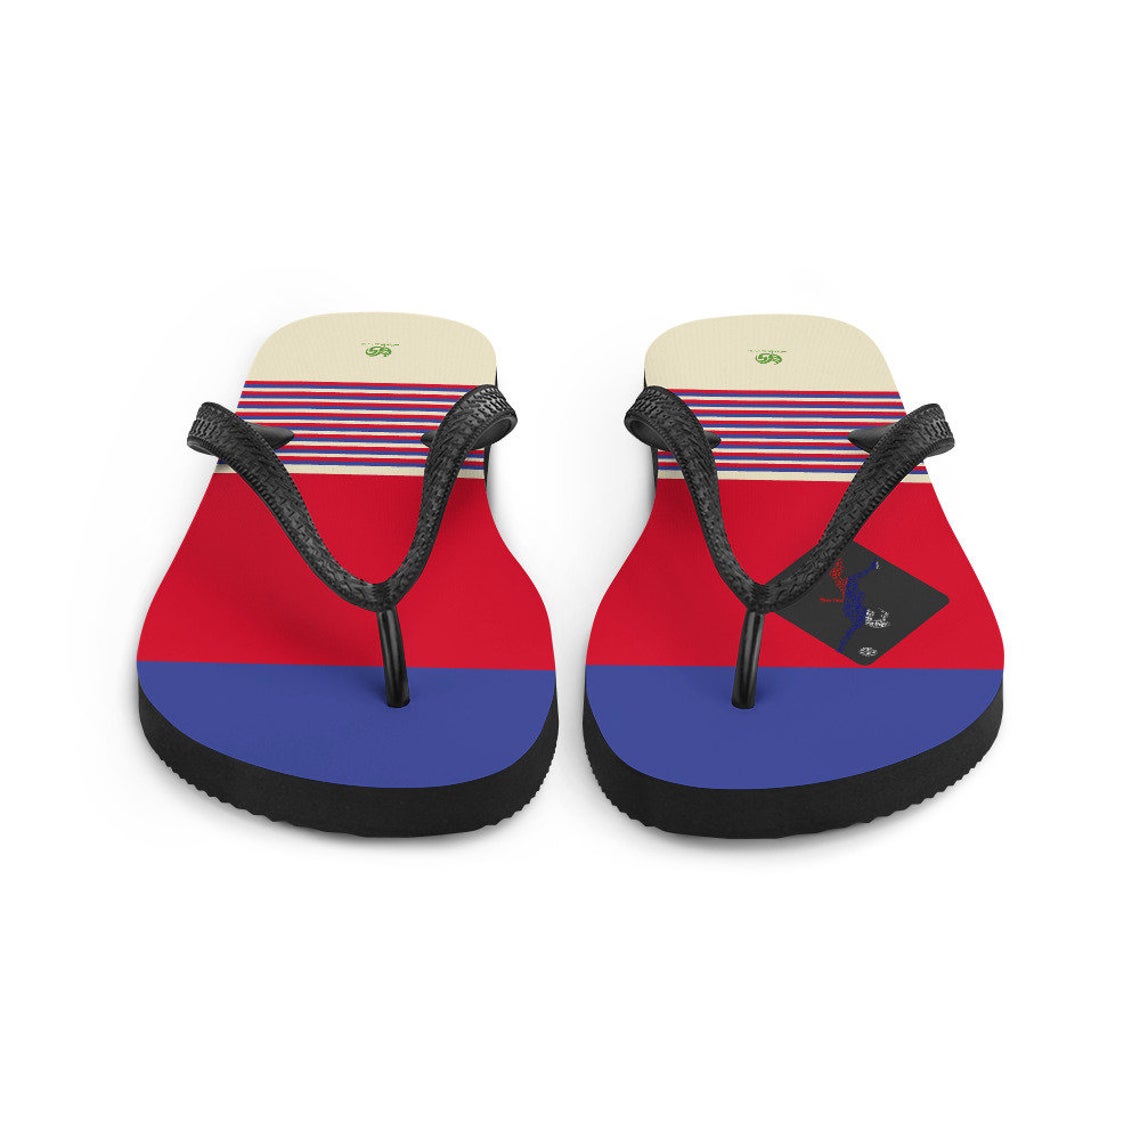 Flip Flop Shop Has Flag of Russia Inspired Slipper Designs by Volleybragswag available now on my ETSY shop!